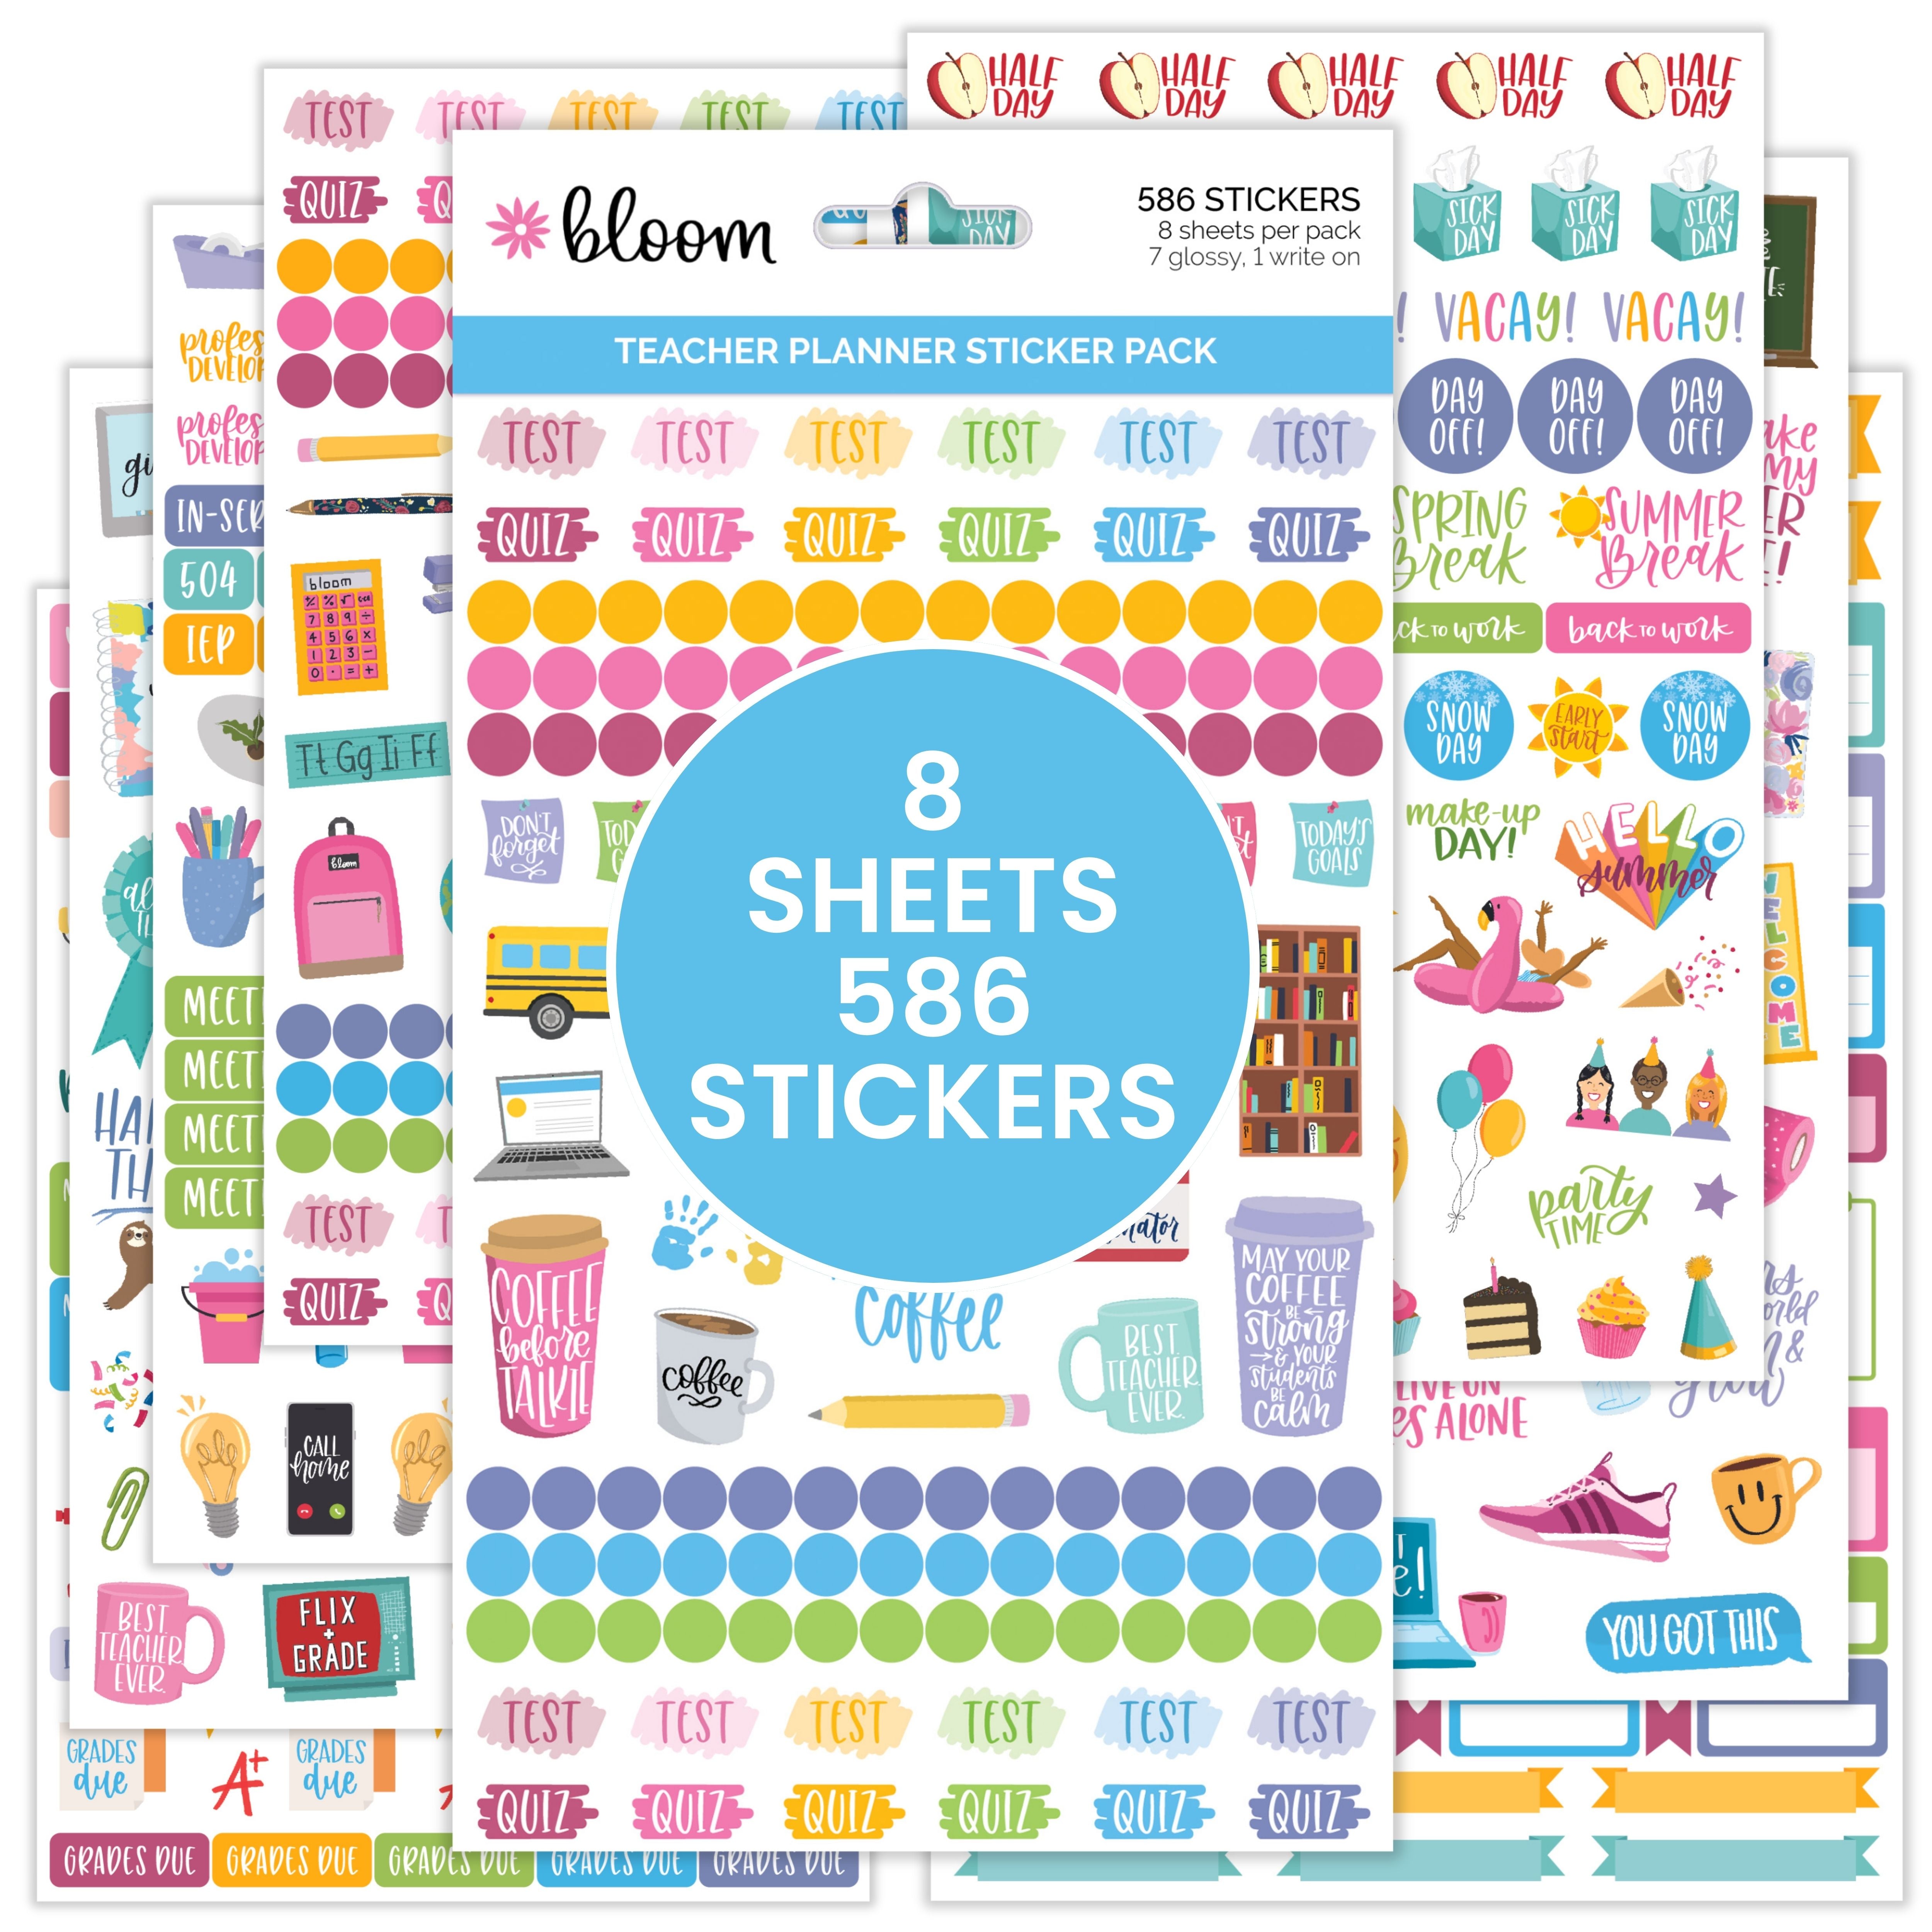 Life Planner Stickers Set. Monthly, Weekly & Daily Planner Stickers 20 Sheets of